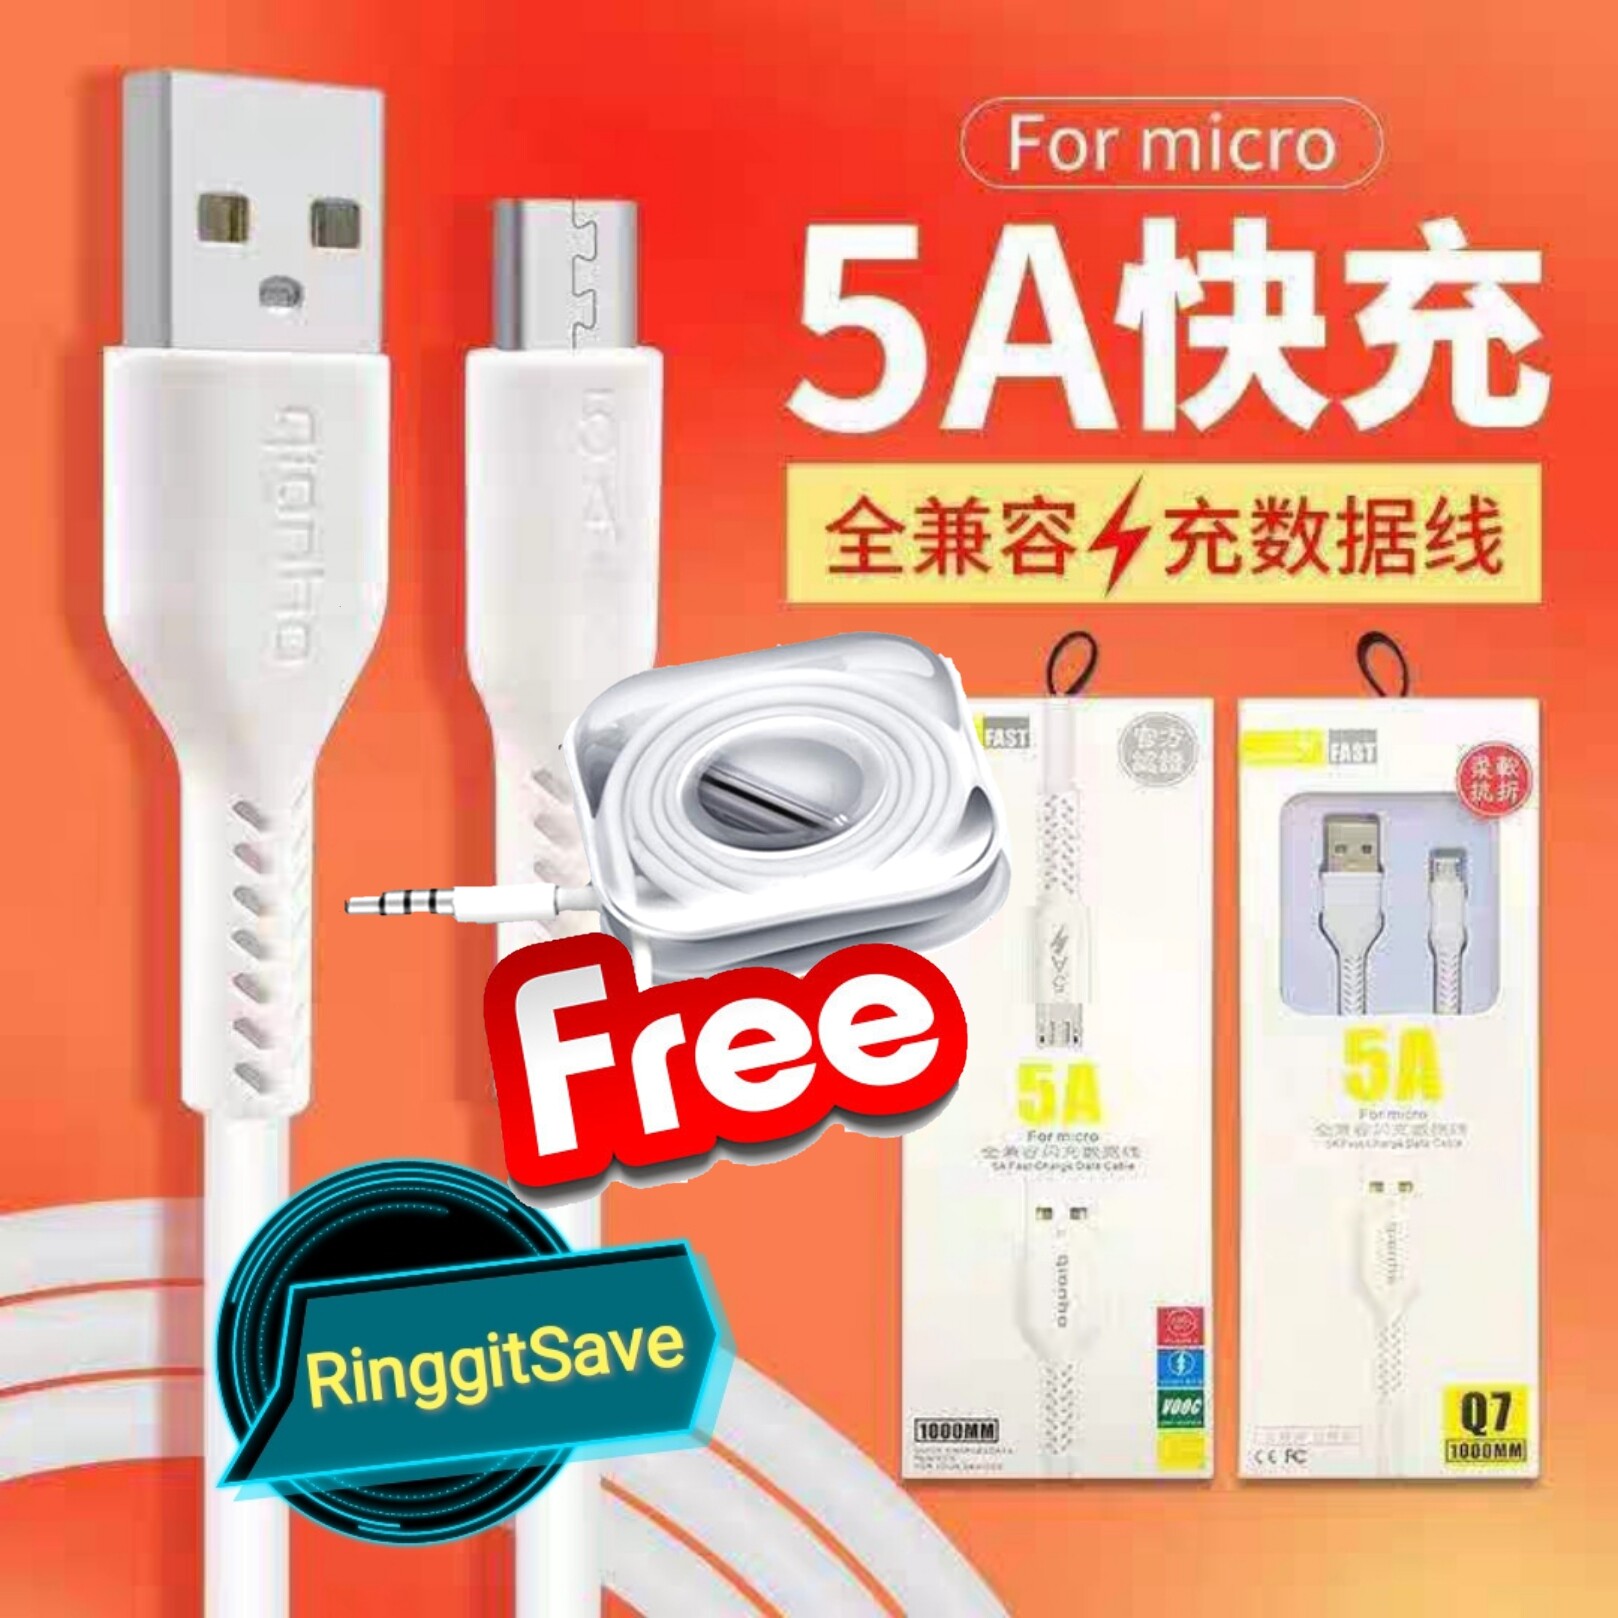 (Ready Stock)Original Qianho Q8 5A Caj Pantas Super Charge Mirco USB Data Fast Charging Cable Support QC 3.0 1M With Free Gift